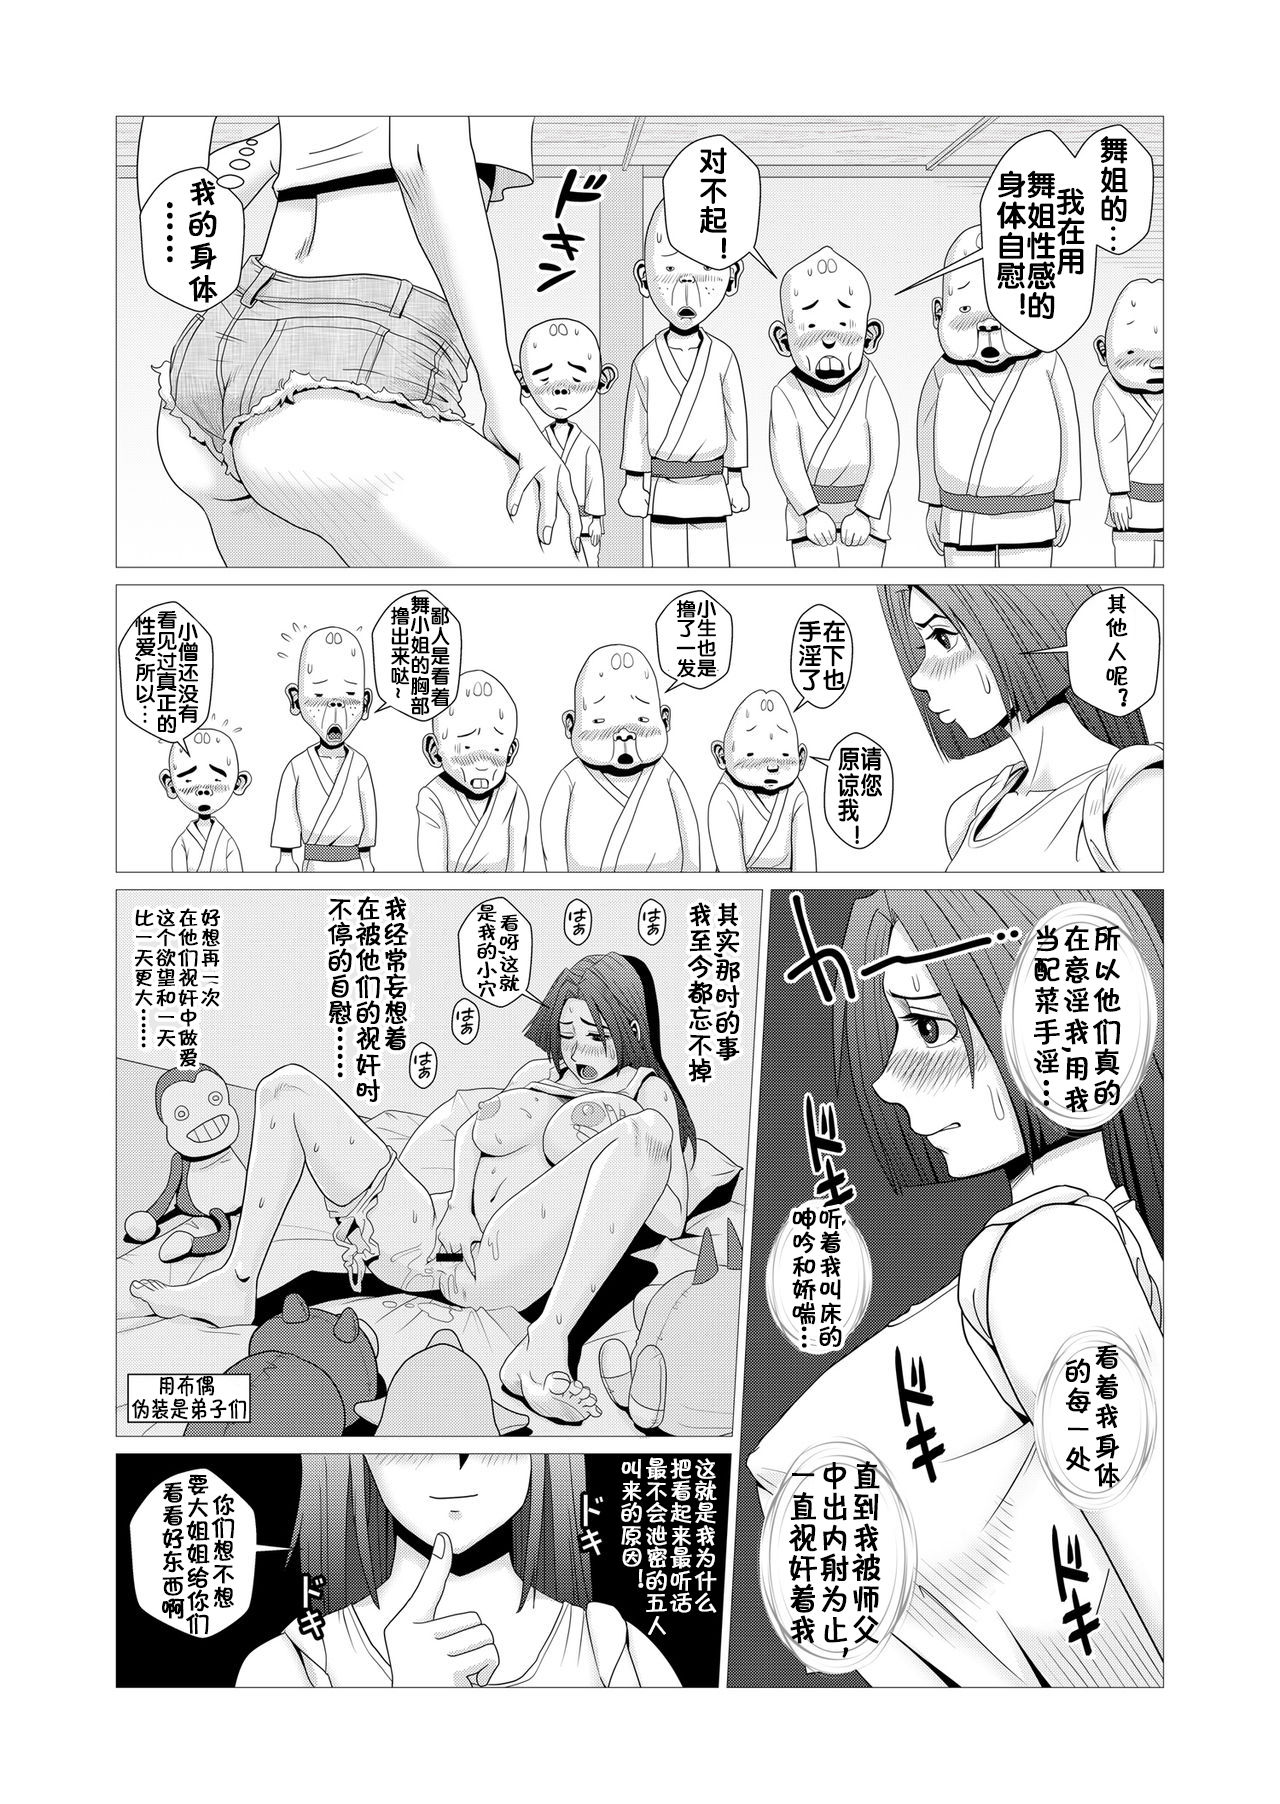 [Falcon115 (Forester)] Maidono no Ni (The King of Fighters) [Chinese] [流木个人汉化] page 3 full